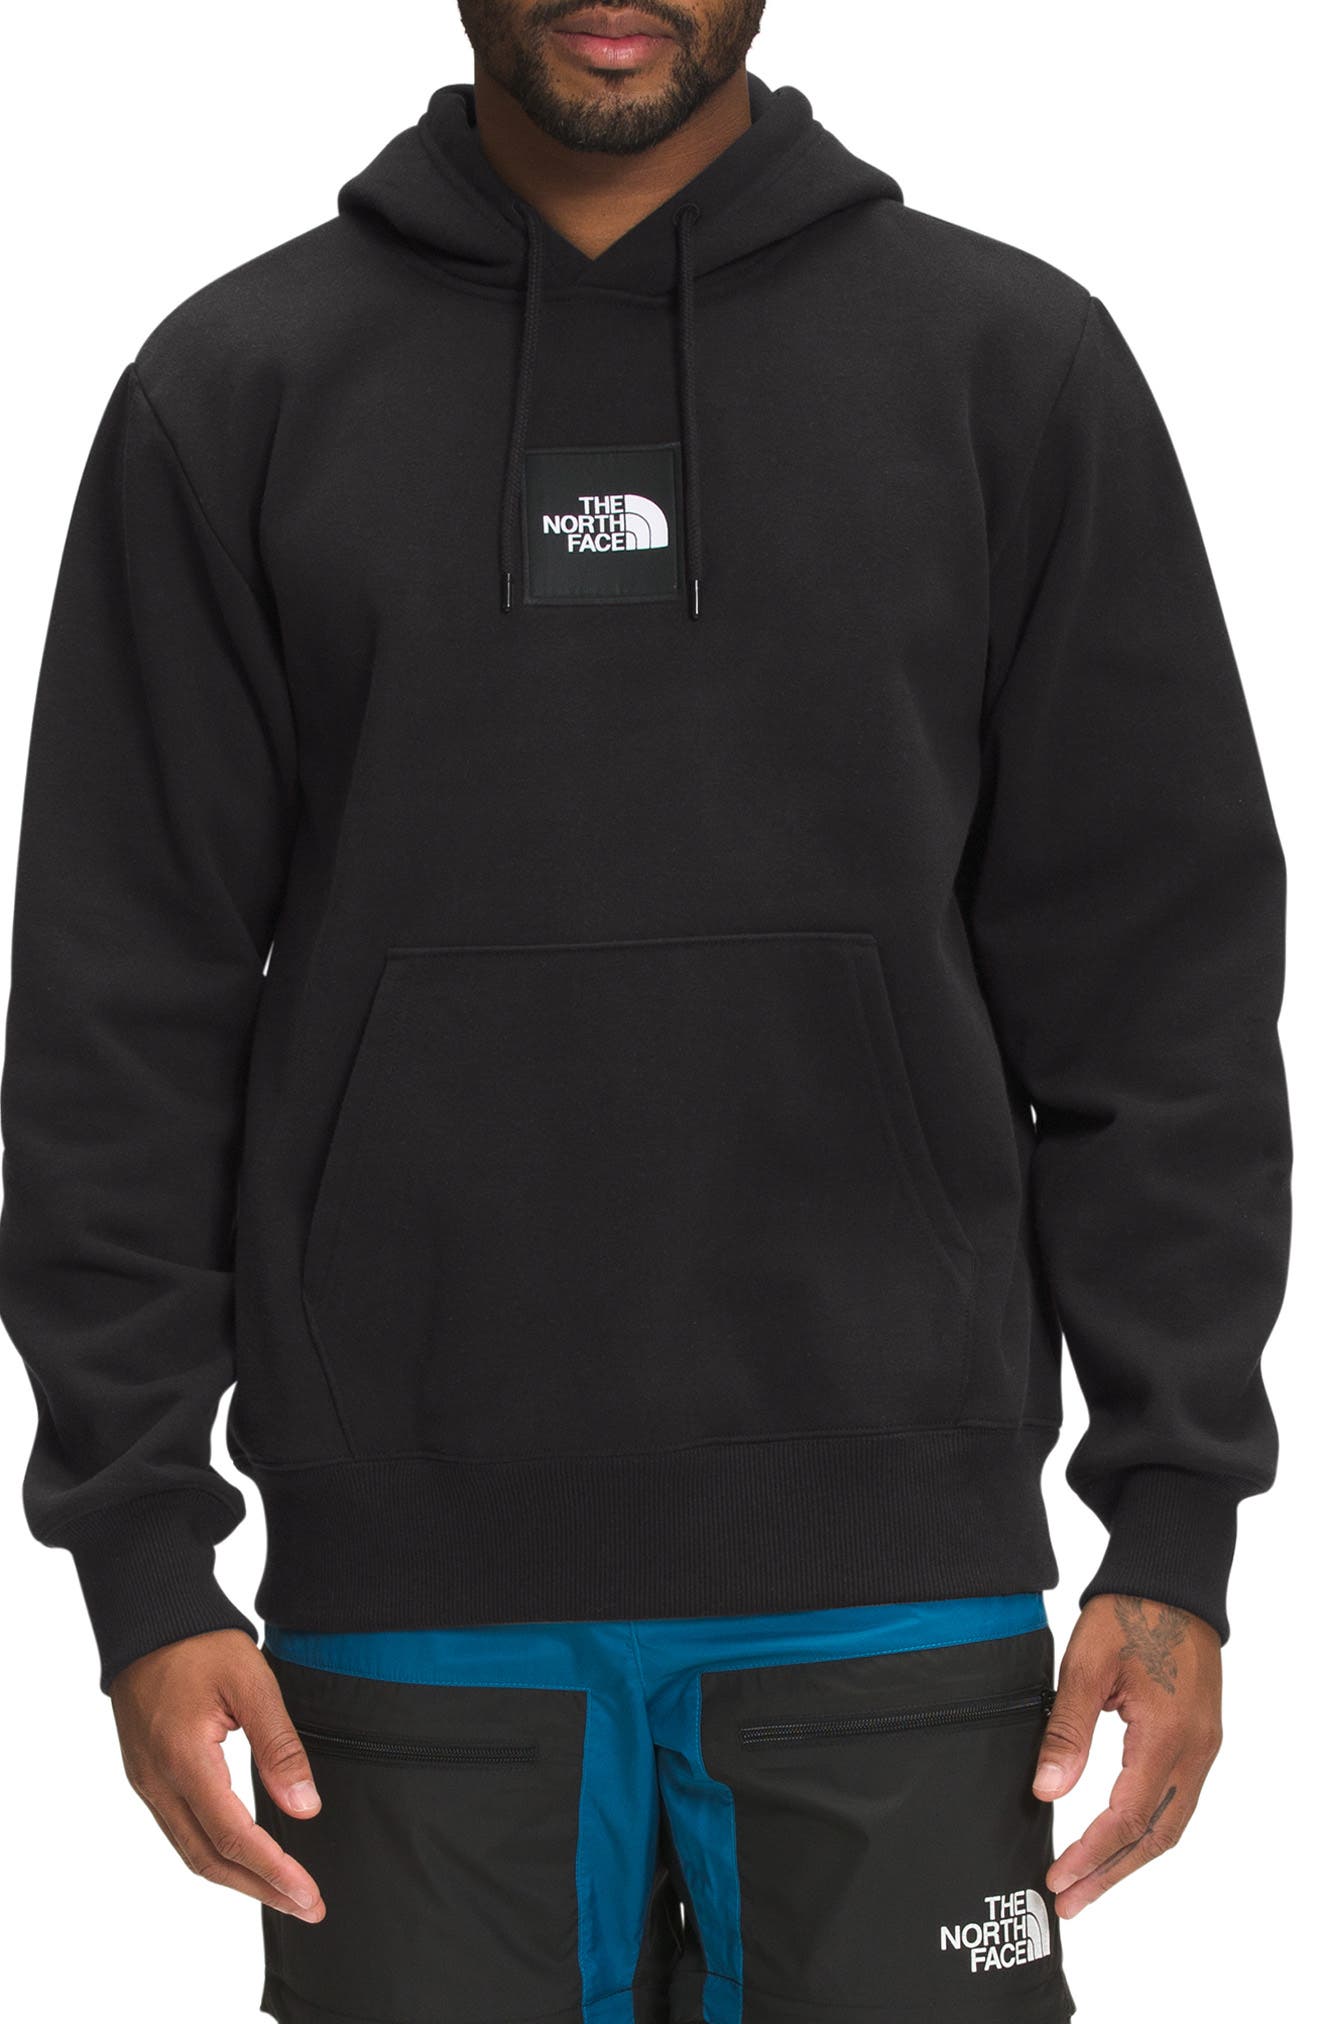 NORTH FACE - NYC LIMITED HOODIE [NY購入品]